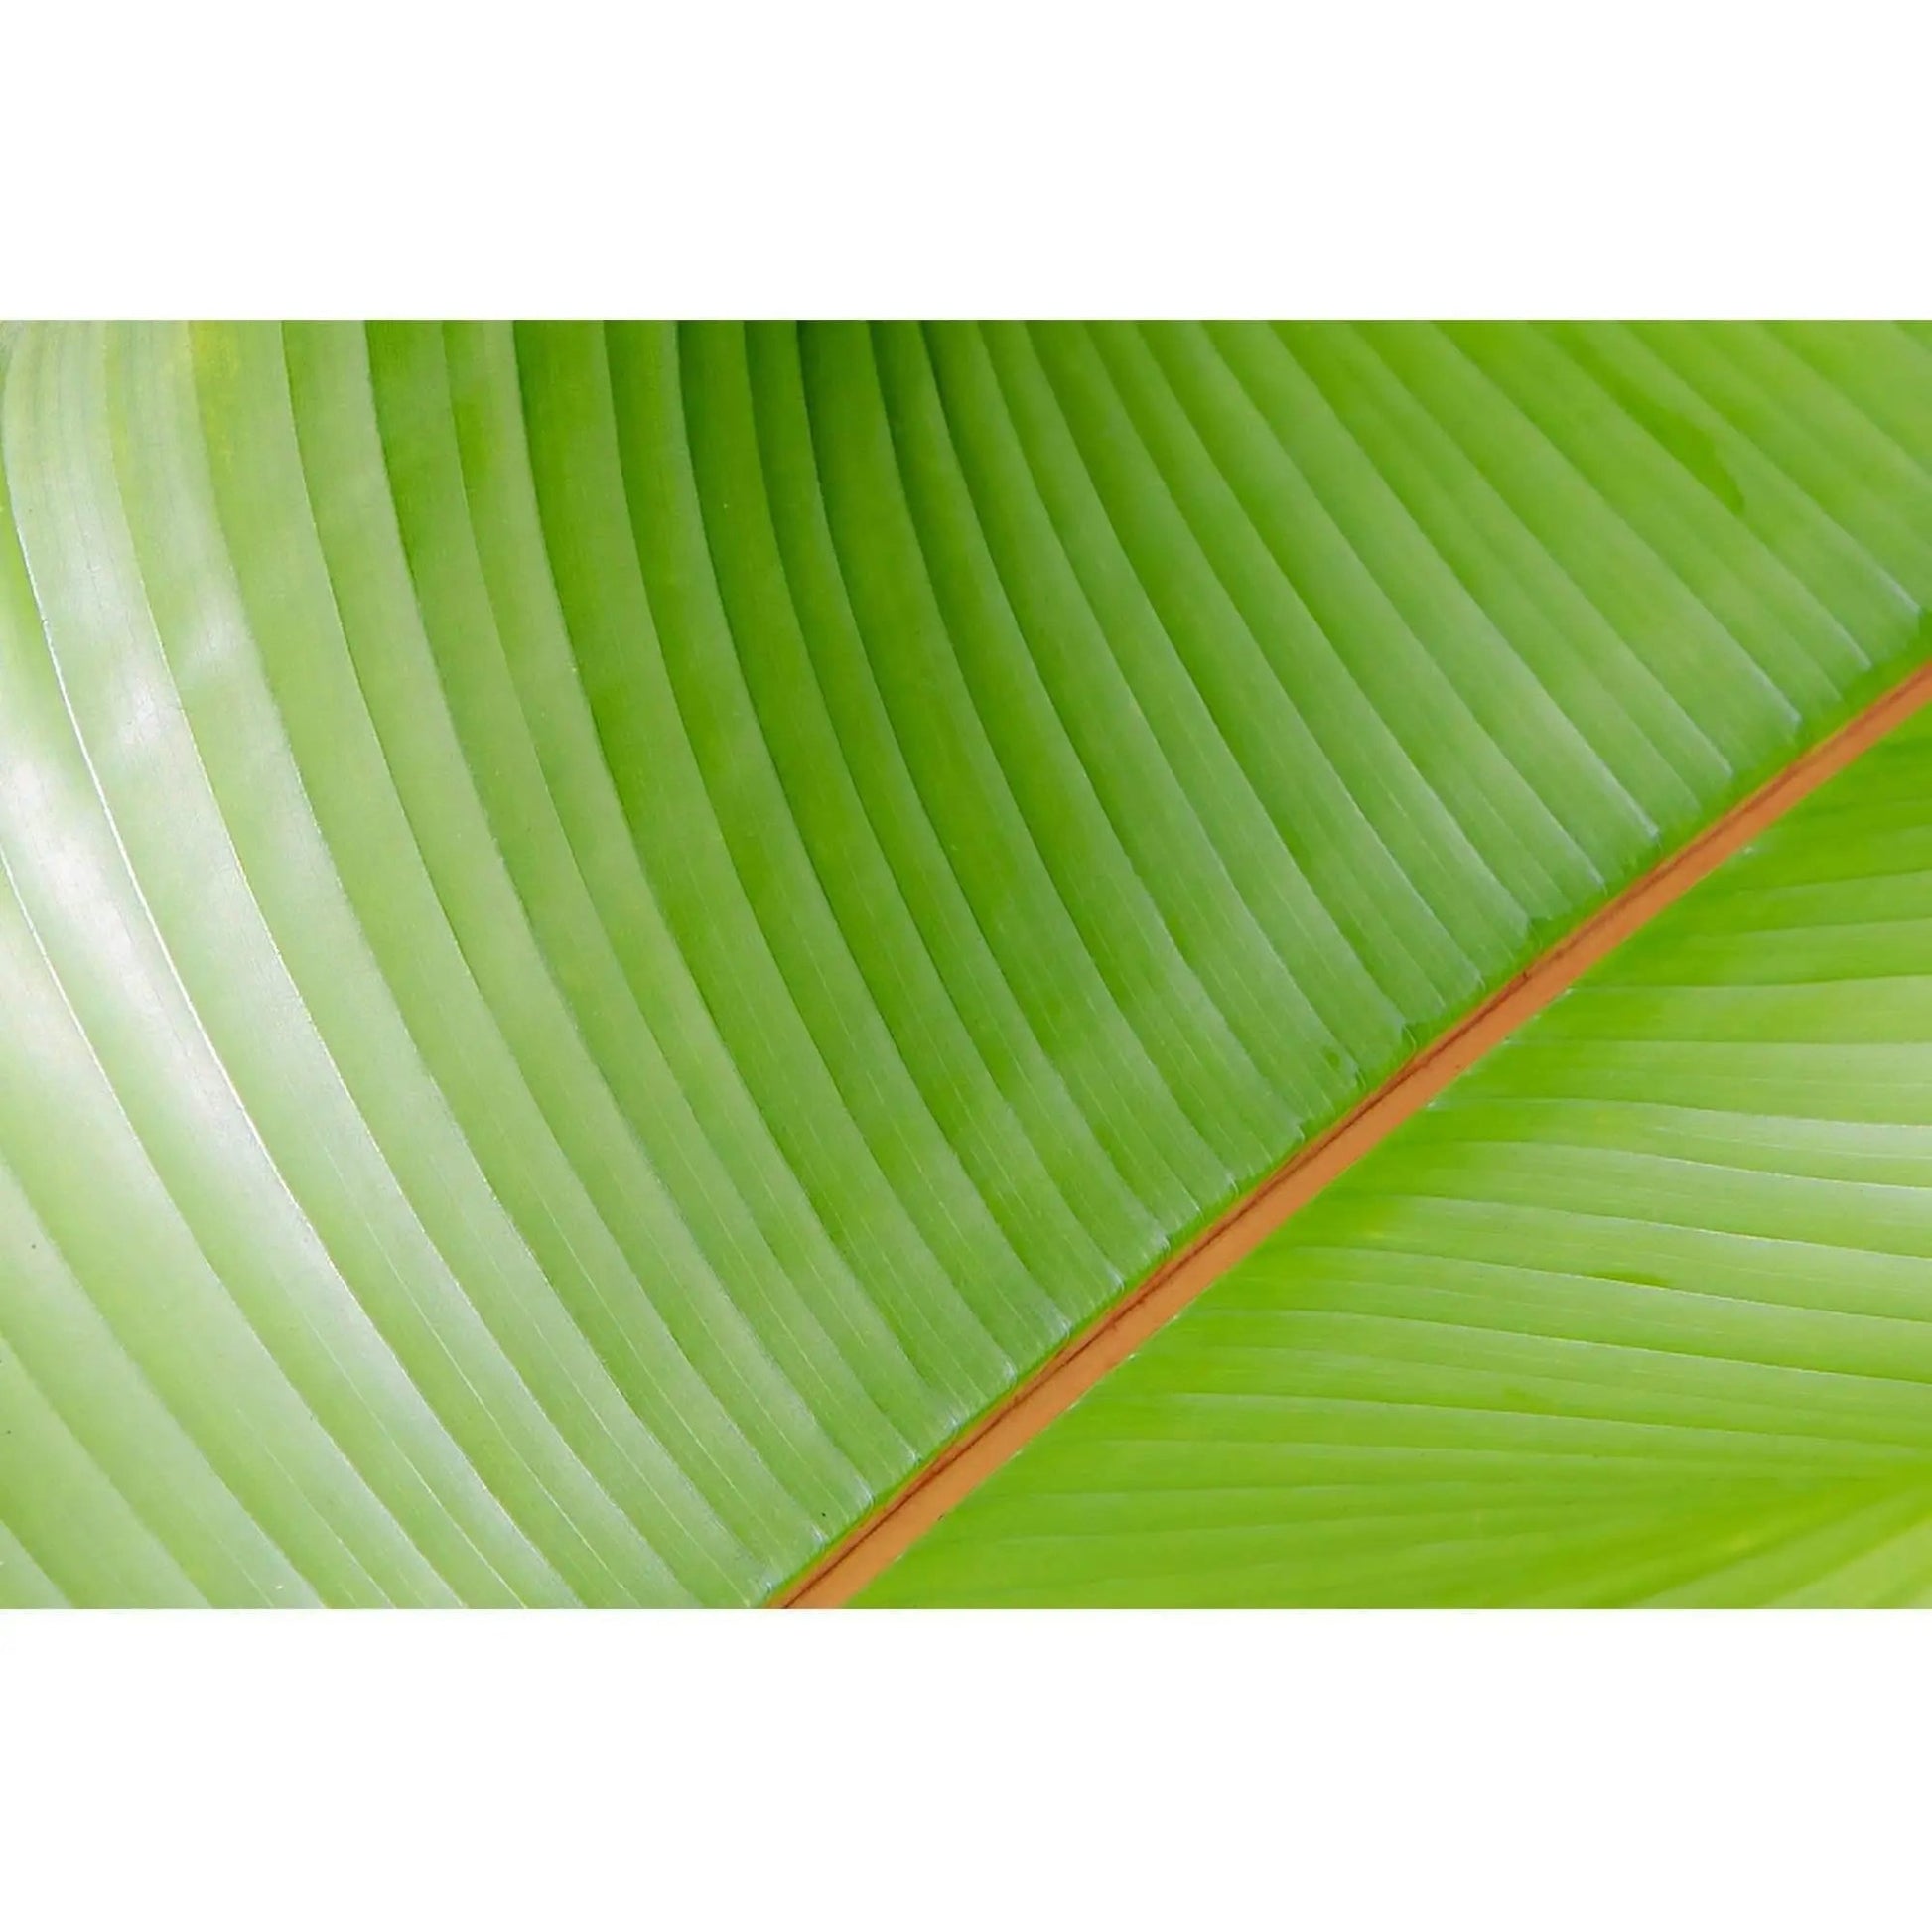 Banana Leaves color bright green orange abstract fine art photography